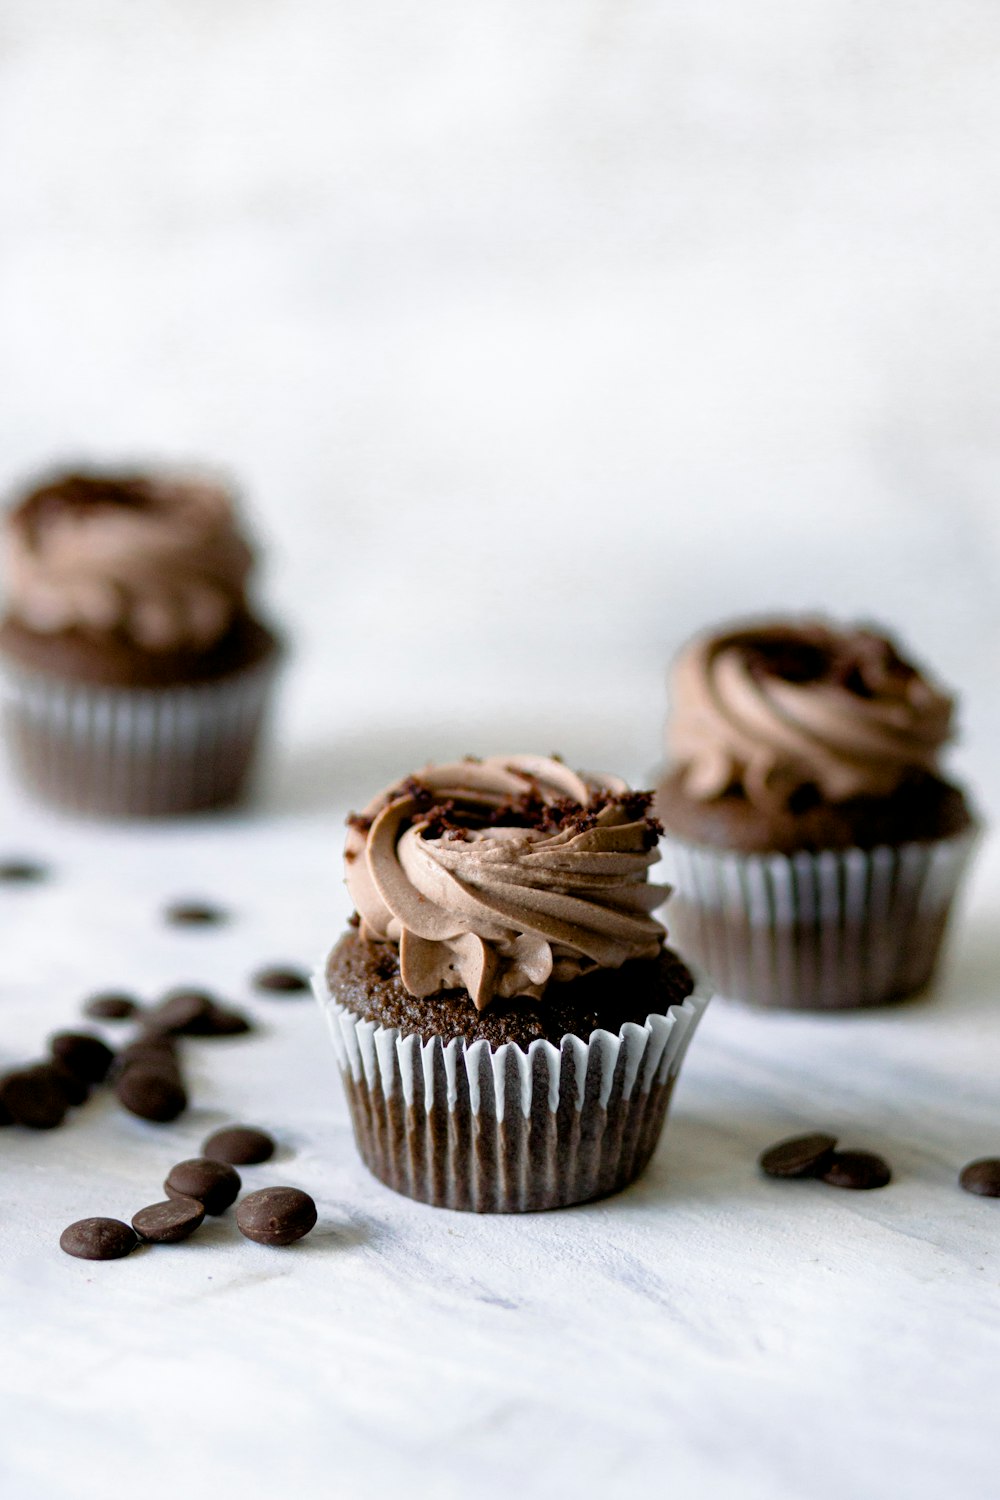 three chocolate cupcakes with chocolate frosting and chocolate chips